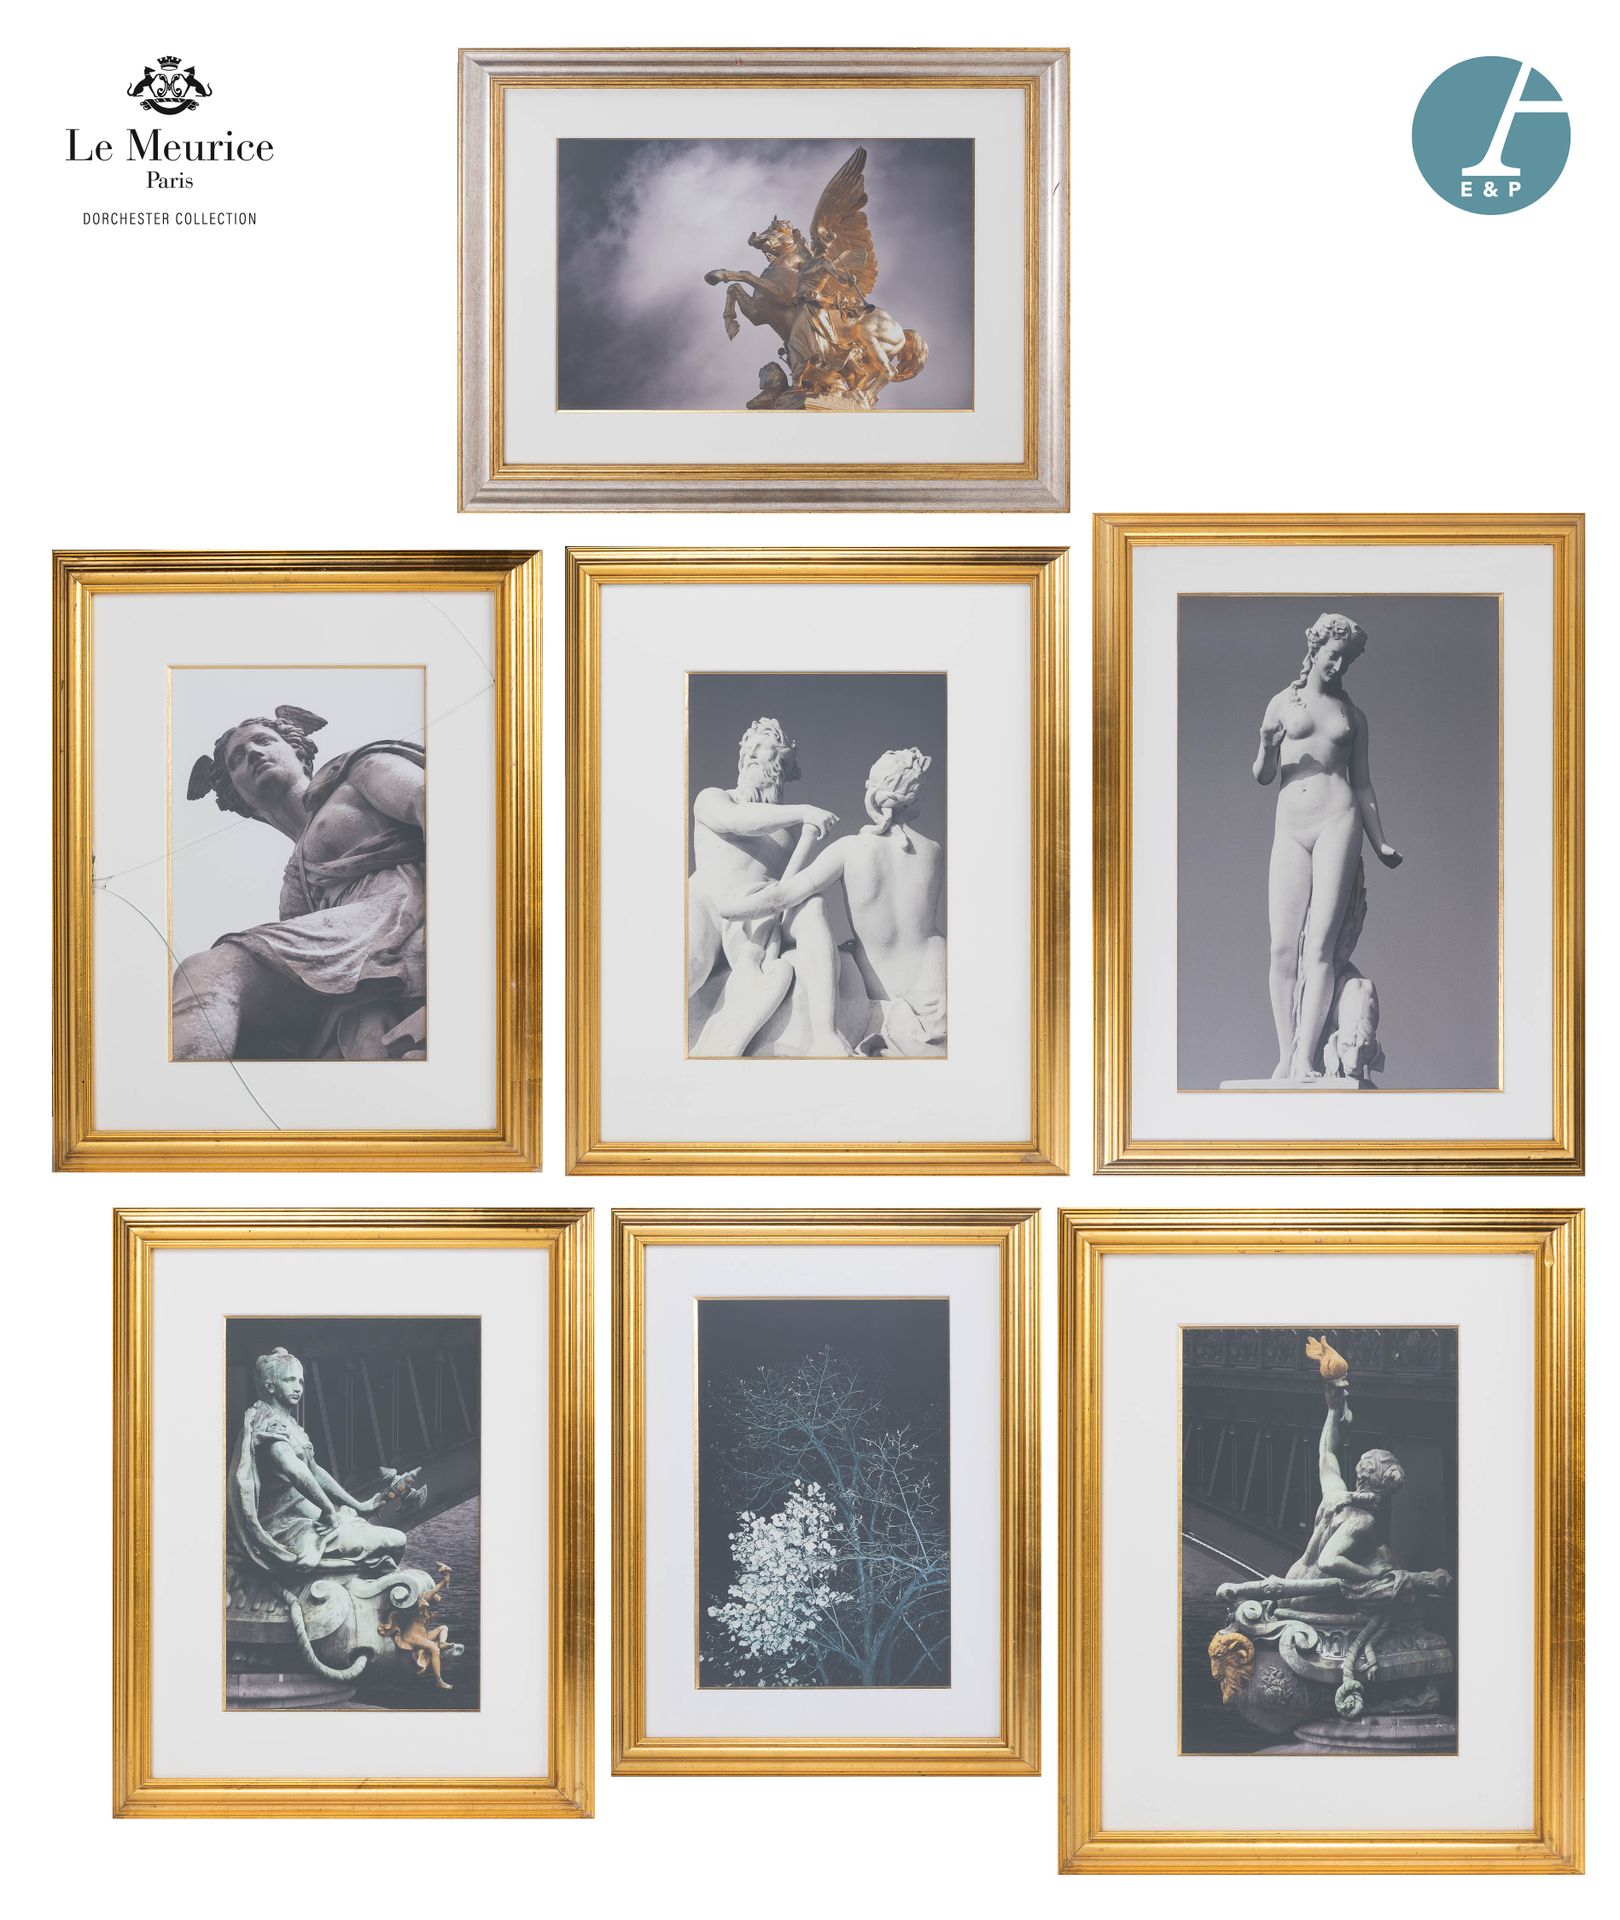 Null From Hôtel Le Meurice.
Lot of seven framed photos, featuring details of scu&hellip;